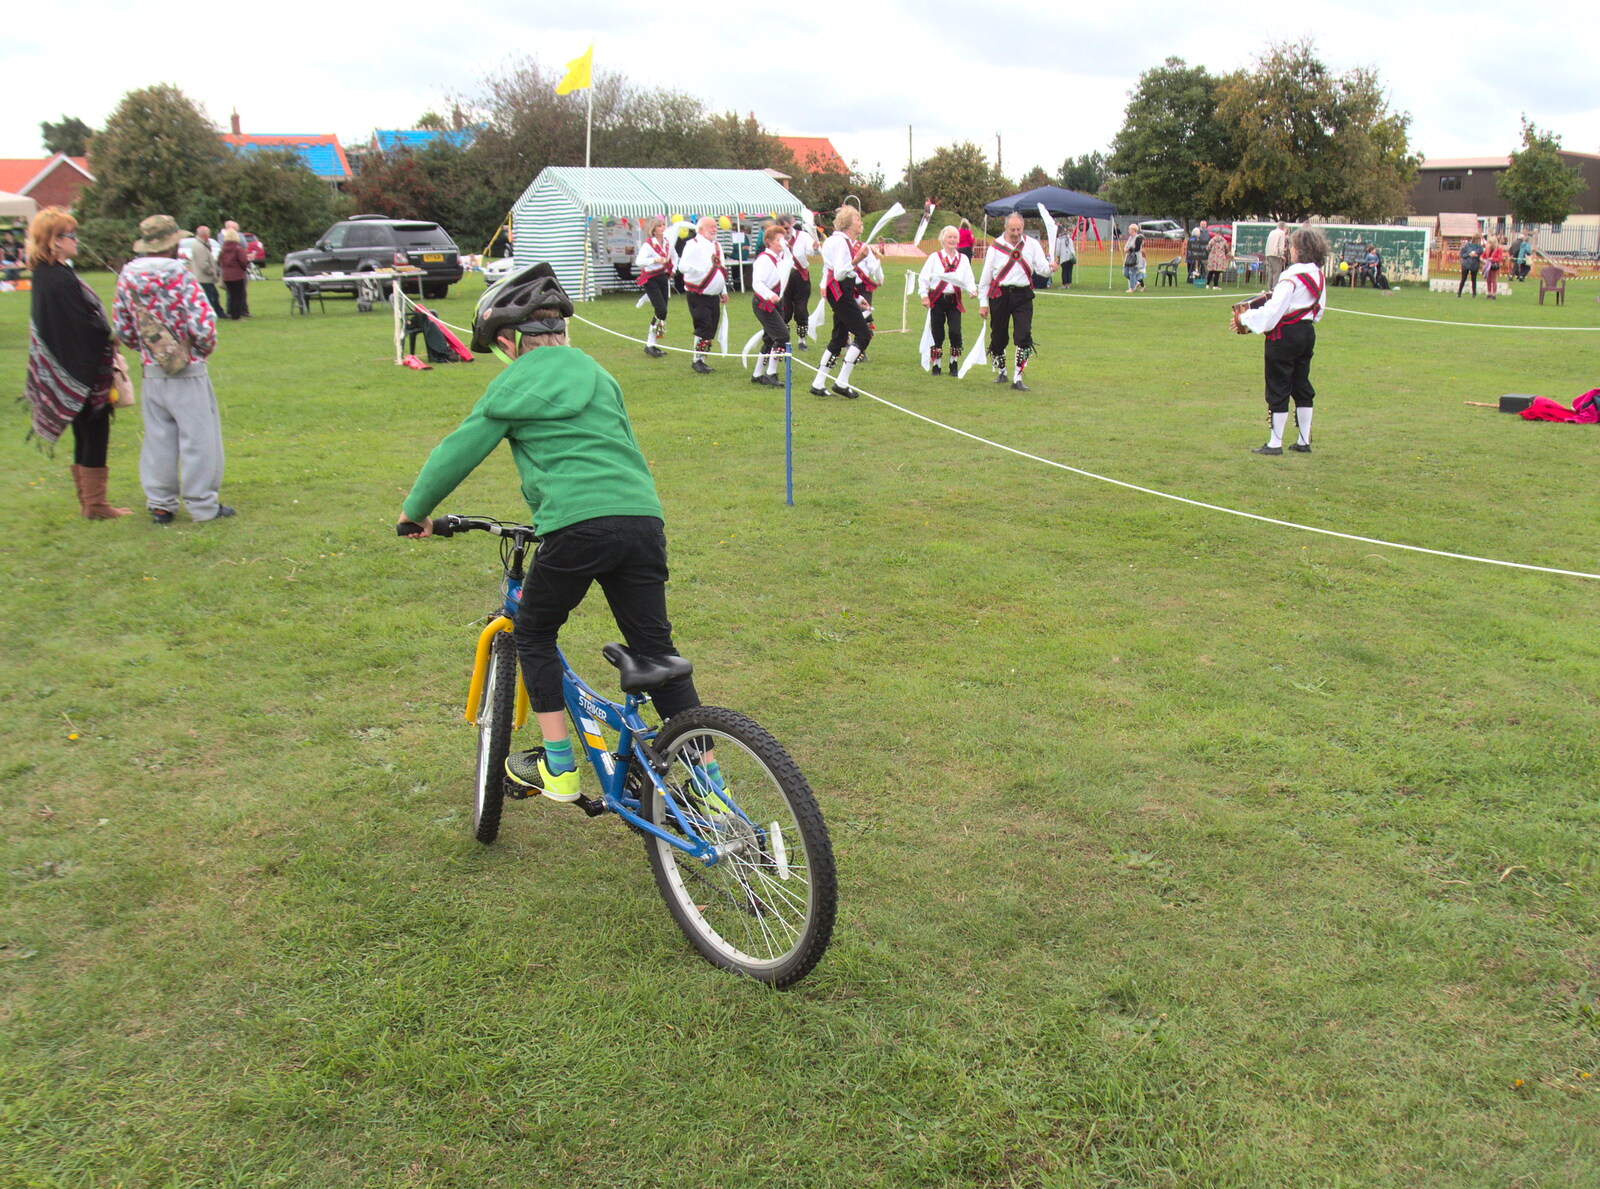 Fred roams around on his bike from A Summer Fete, Palgrave, Suffolk - 10th September 2017